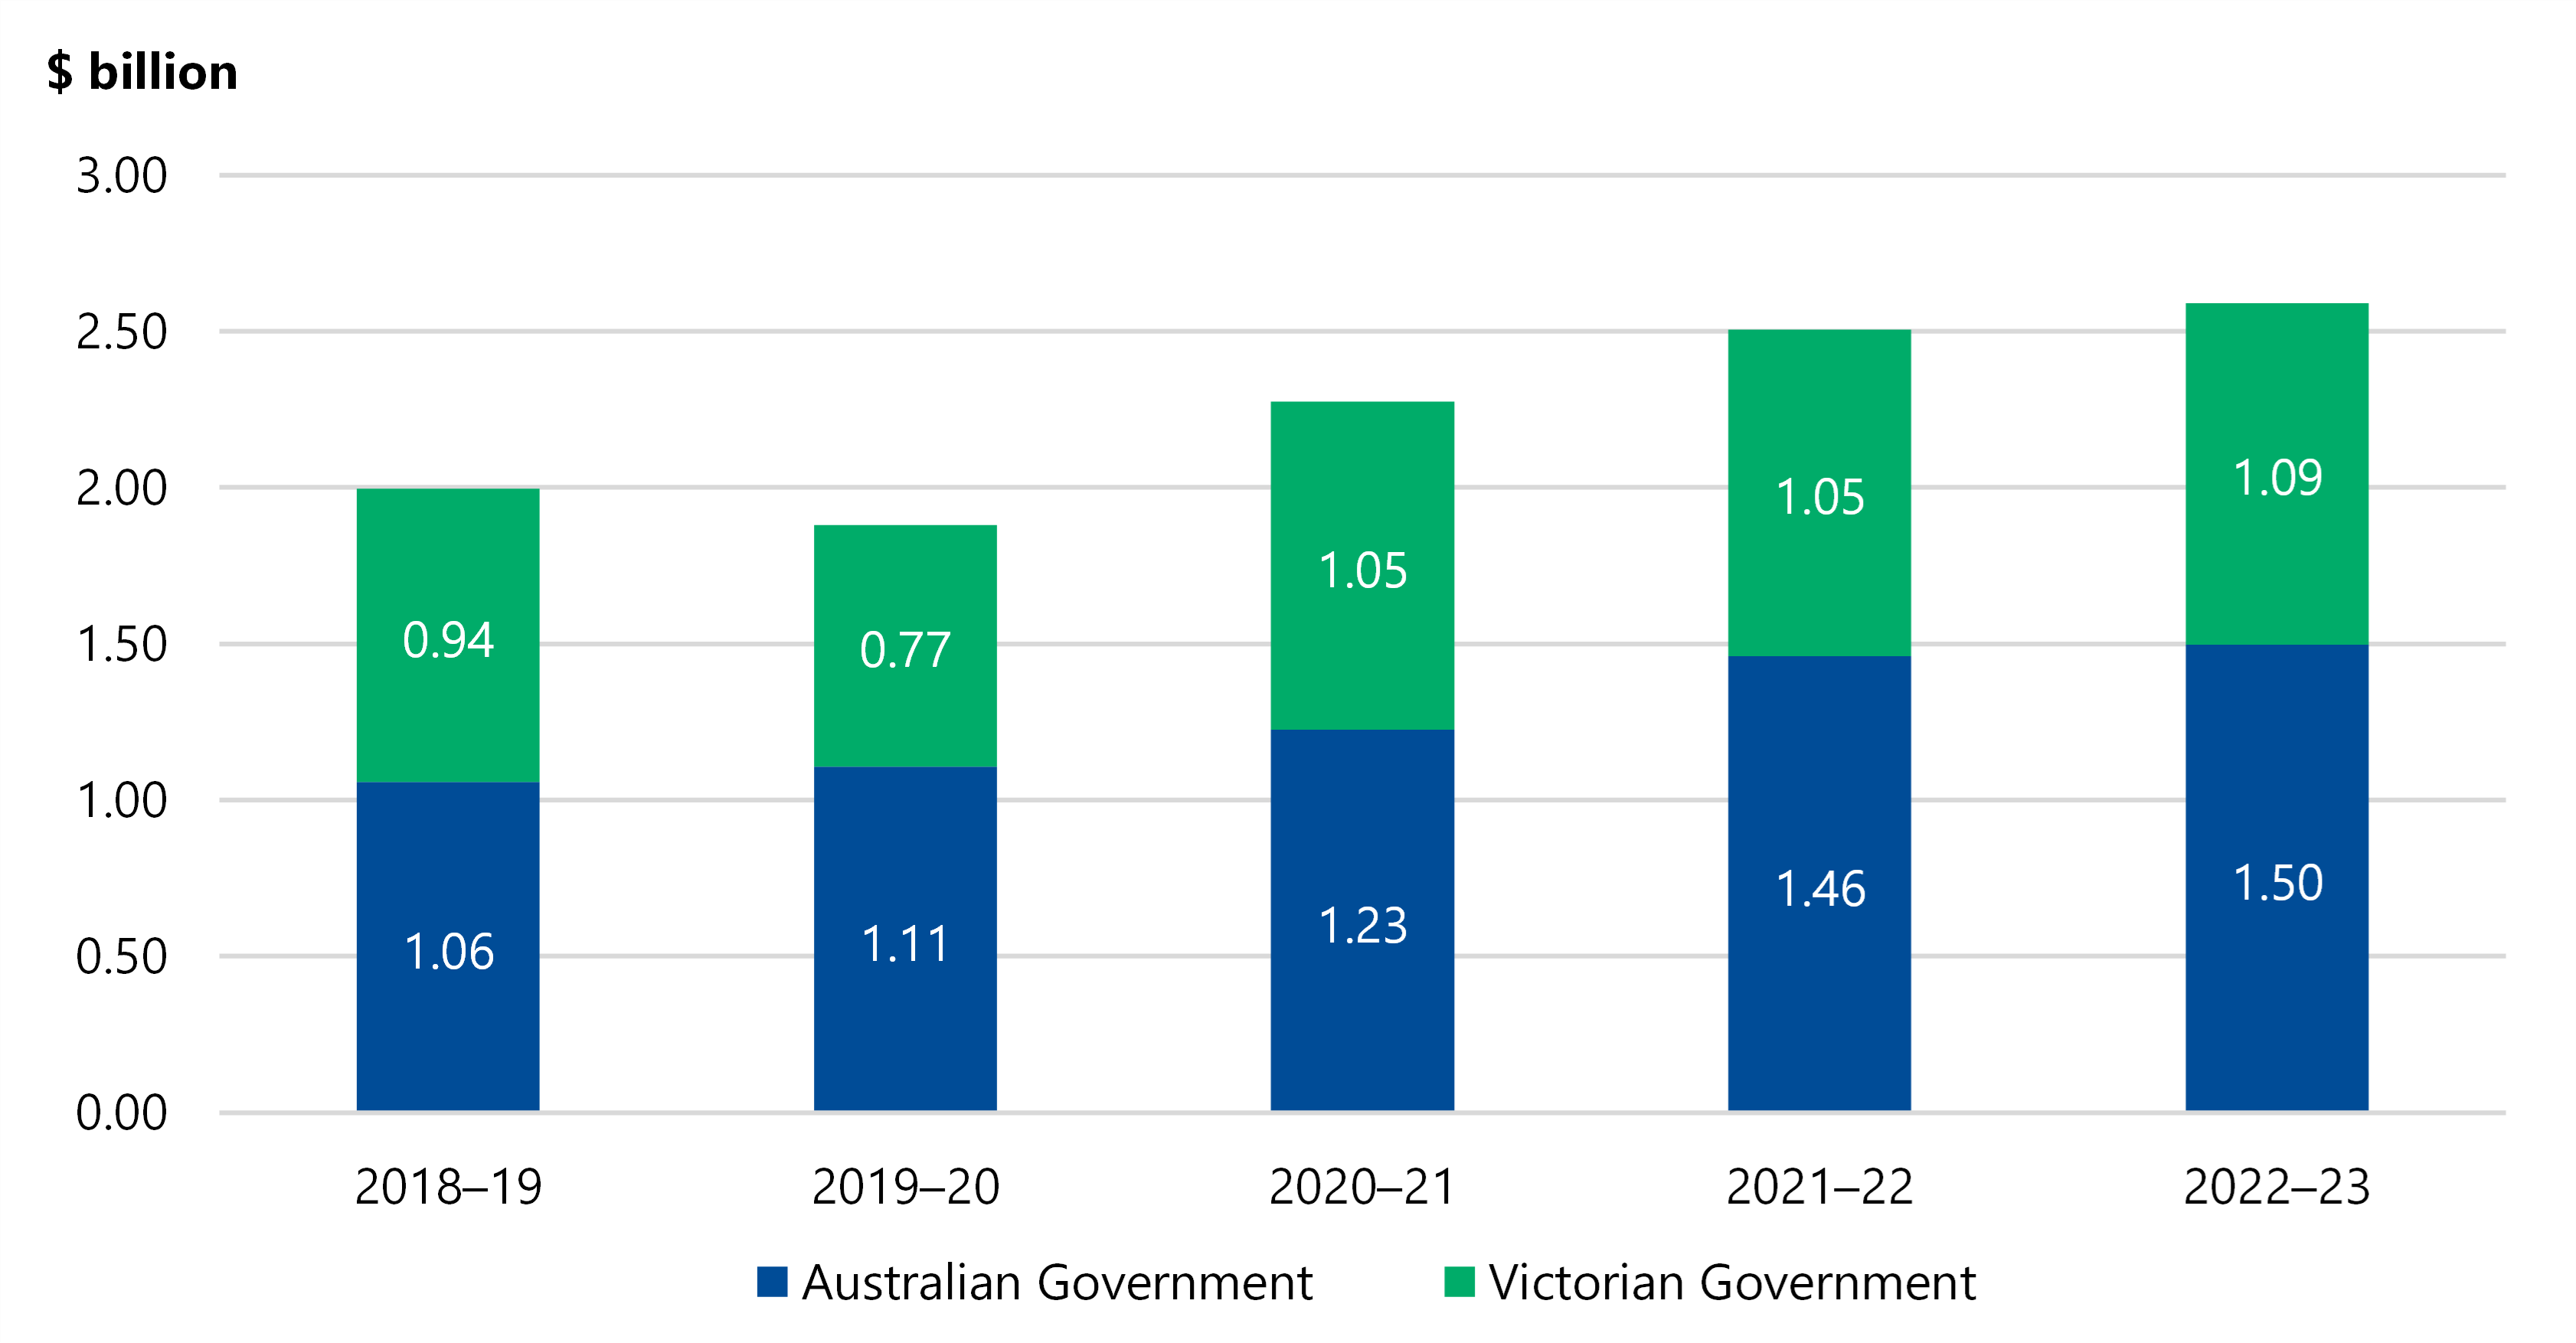 Figure 7 is a stacked bar chart showing that councils' revenues from the Australian Government were $1.06 billion in 2018–19, $1.11 billion in 2019–20, $1.23 billion in 2020–21, $1.46 billion in 2021–22 and $1.50 billion in 2022–23. Revenues from the Victorian Government were $0.94 billion in 2018–19, $0.77 billion in 2019–20, $1.05 billion in 2020–21, $1.05 billion in 2021–22 and $1.09 billion in 2022–23.